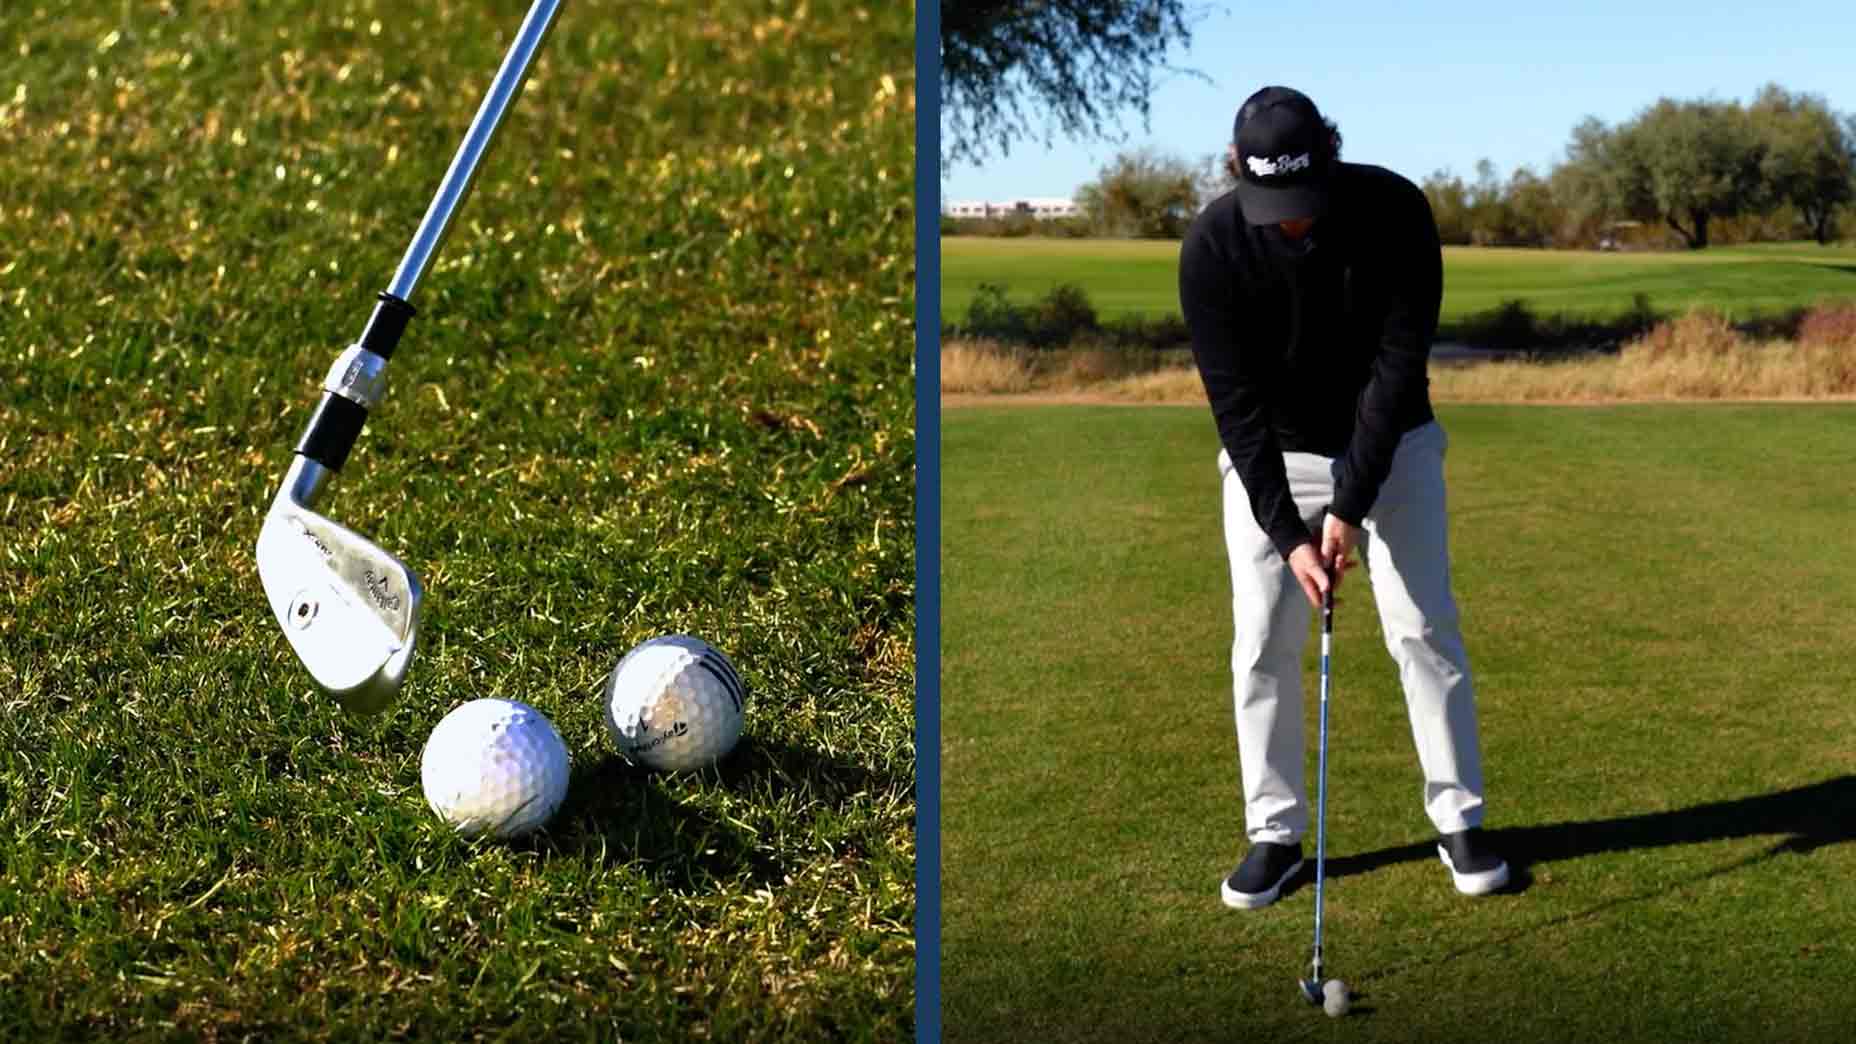 Want better impact and more distance? Work on your dynamic motion